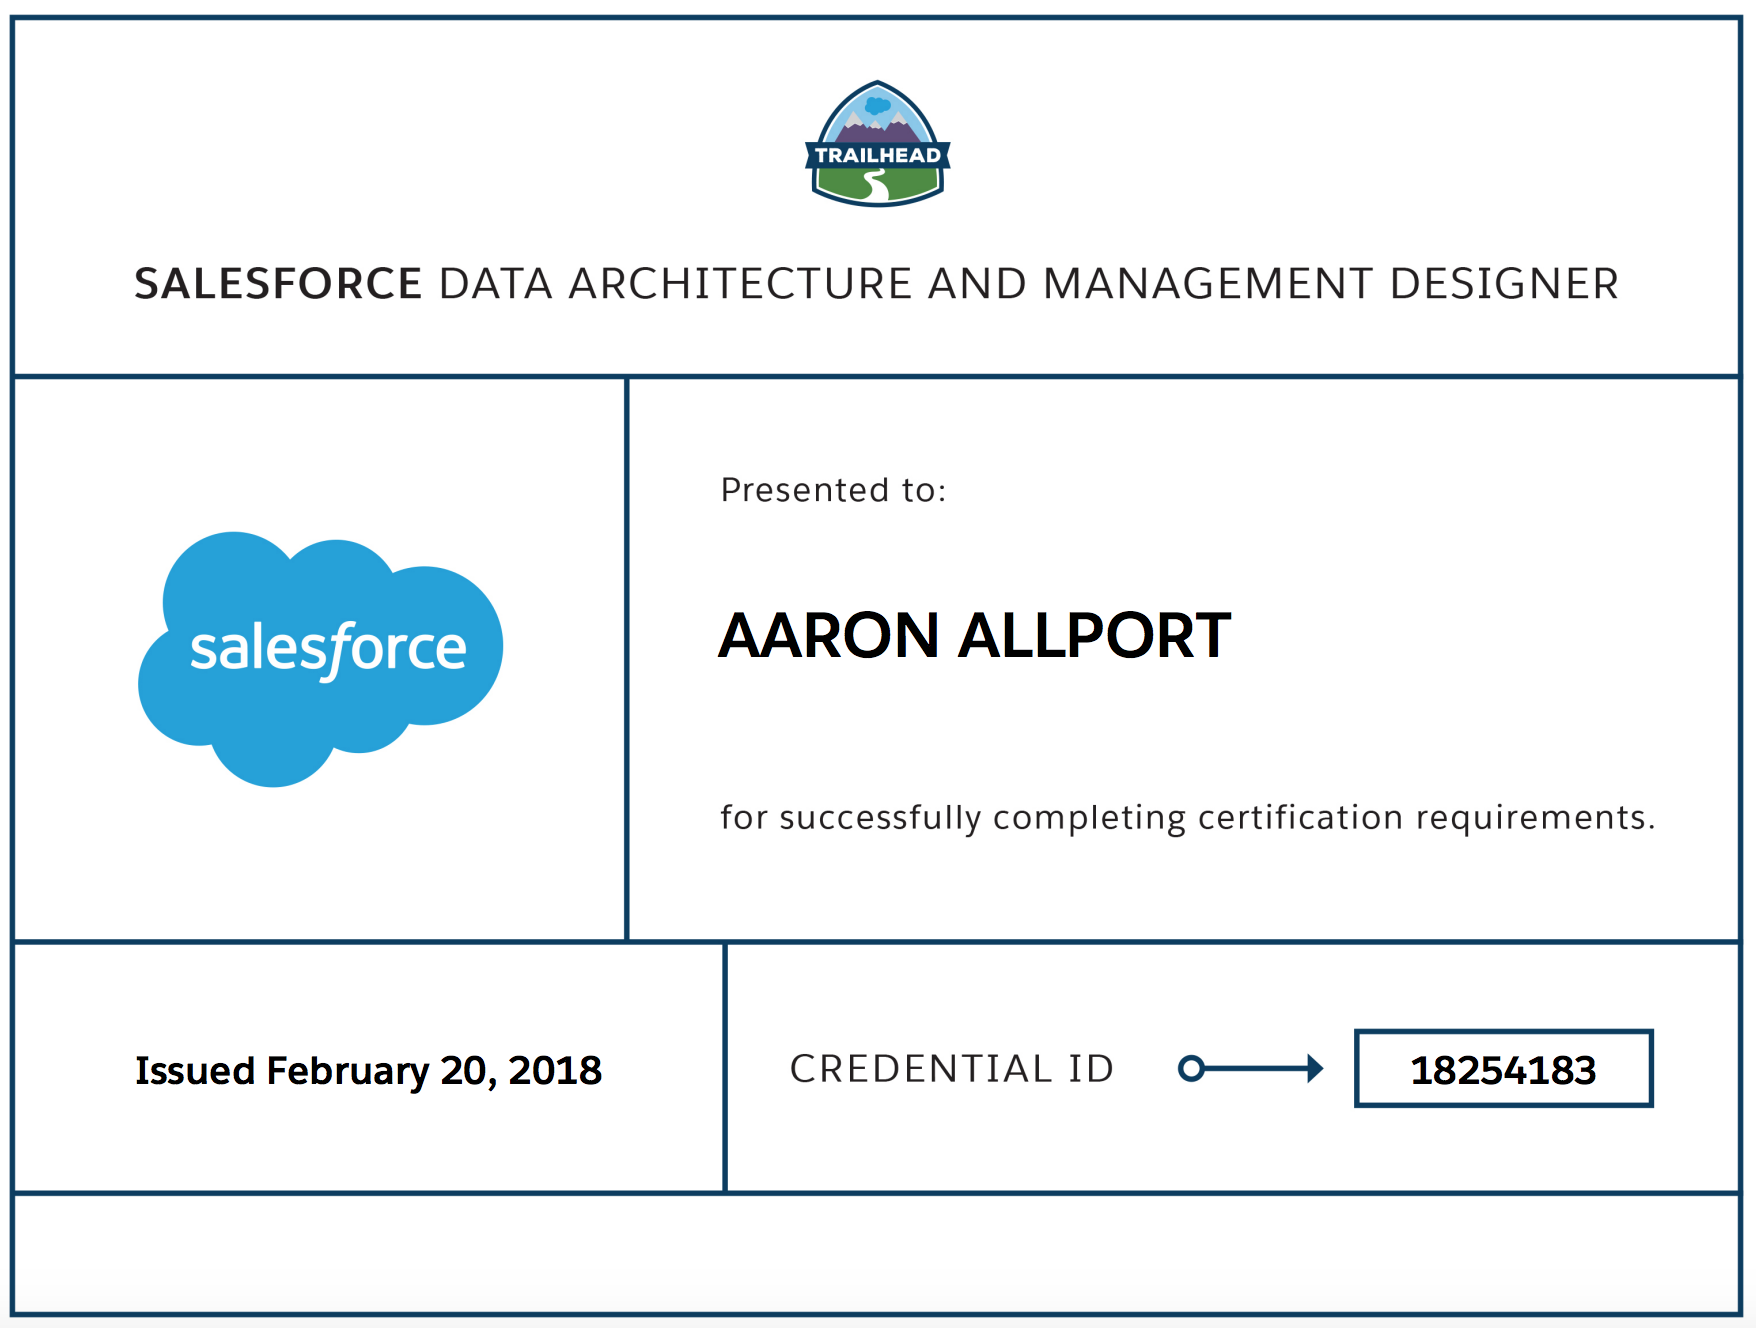 I'm a Certified Salesforce Data Management and Architecture Designer